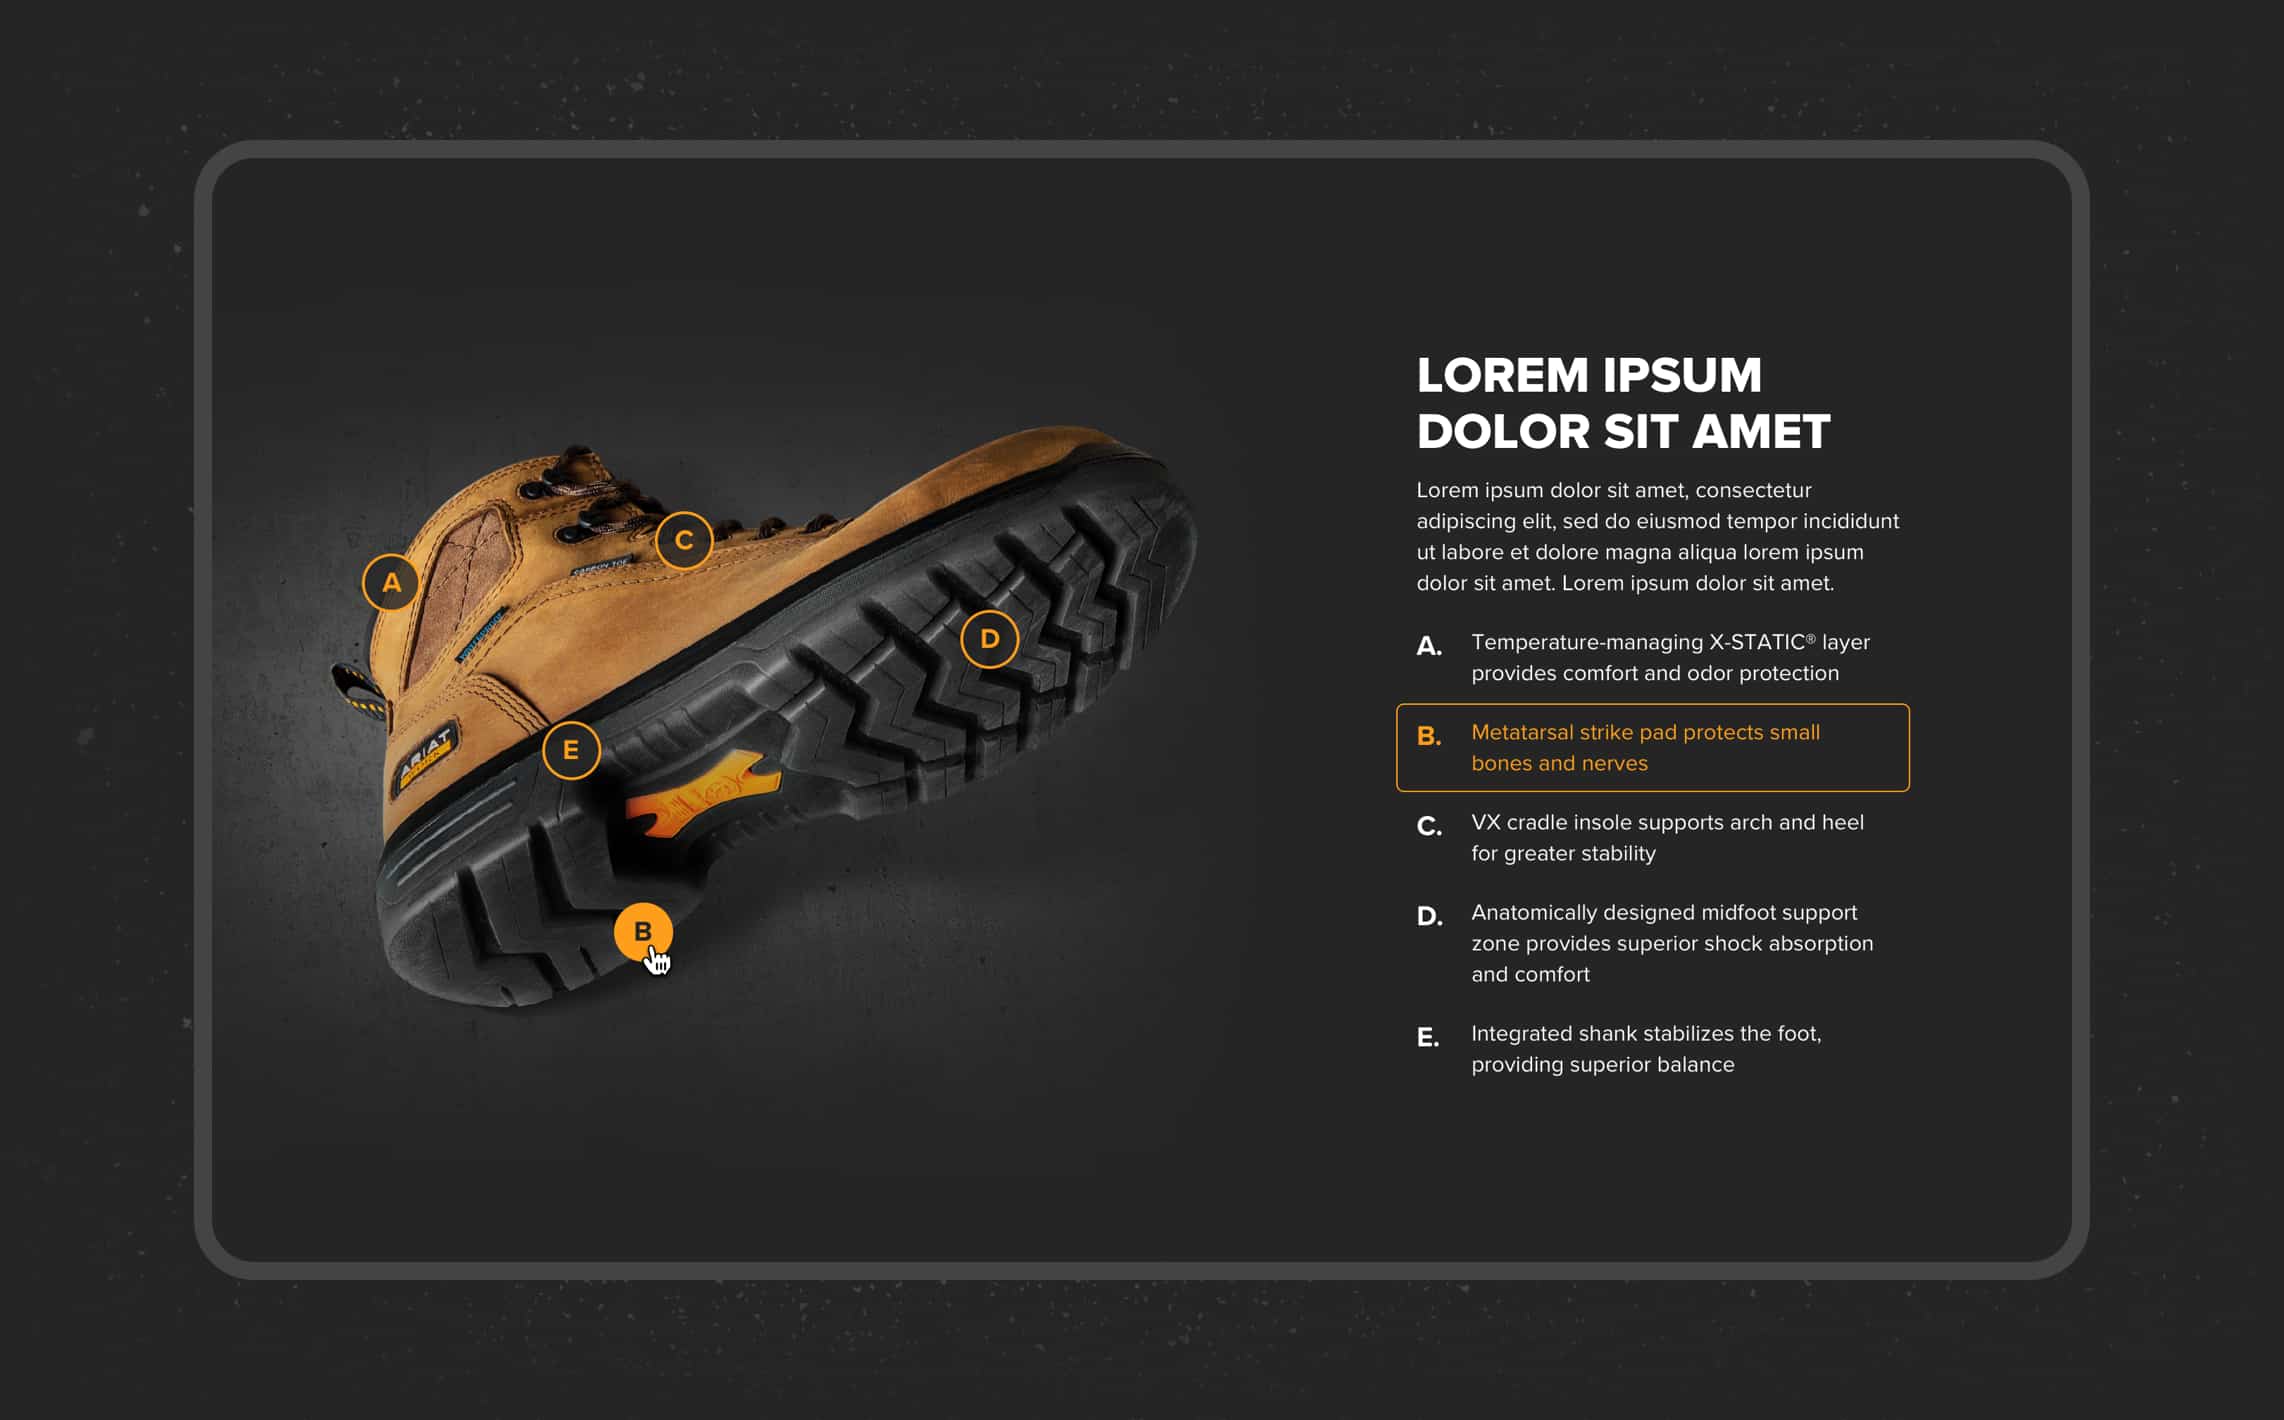 Screenshot showing interactive panel on Ariat website used to explain the technology behind their boots.